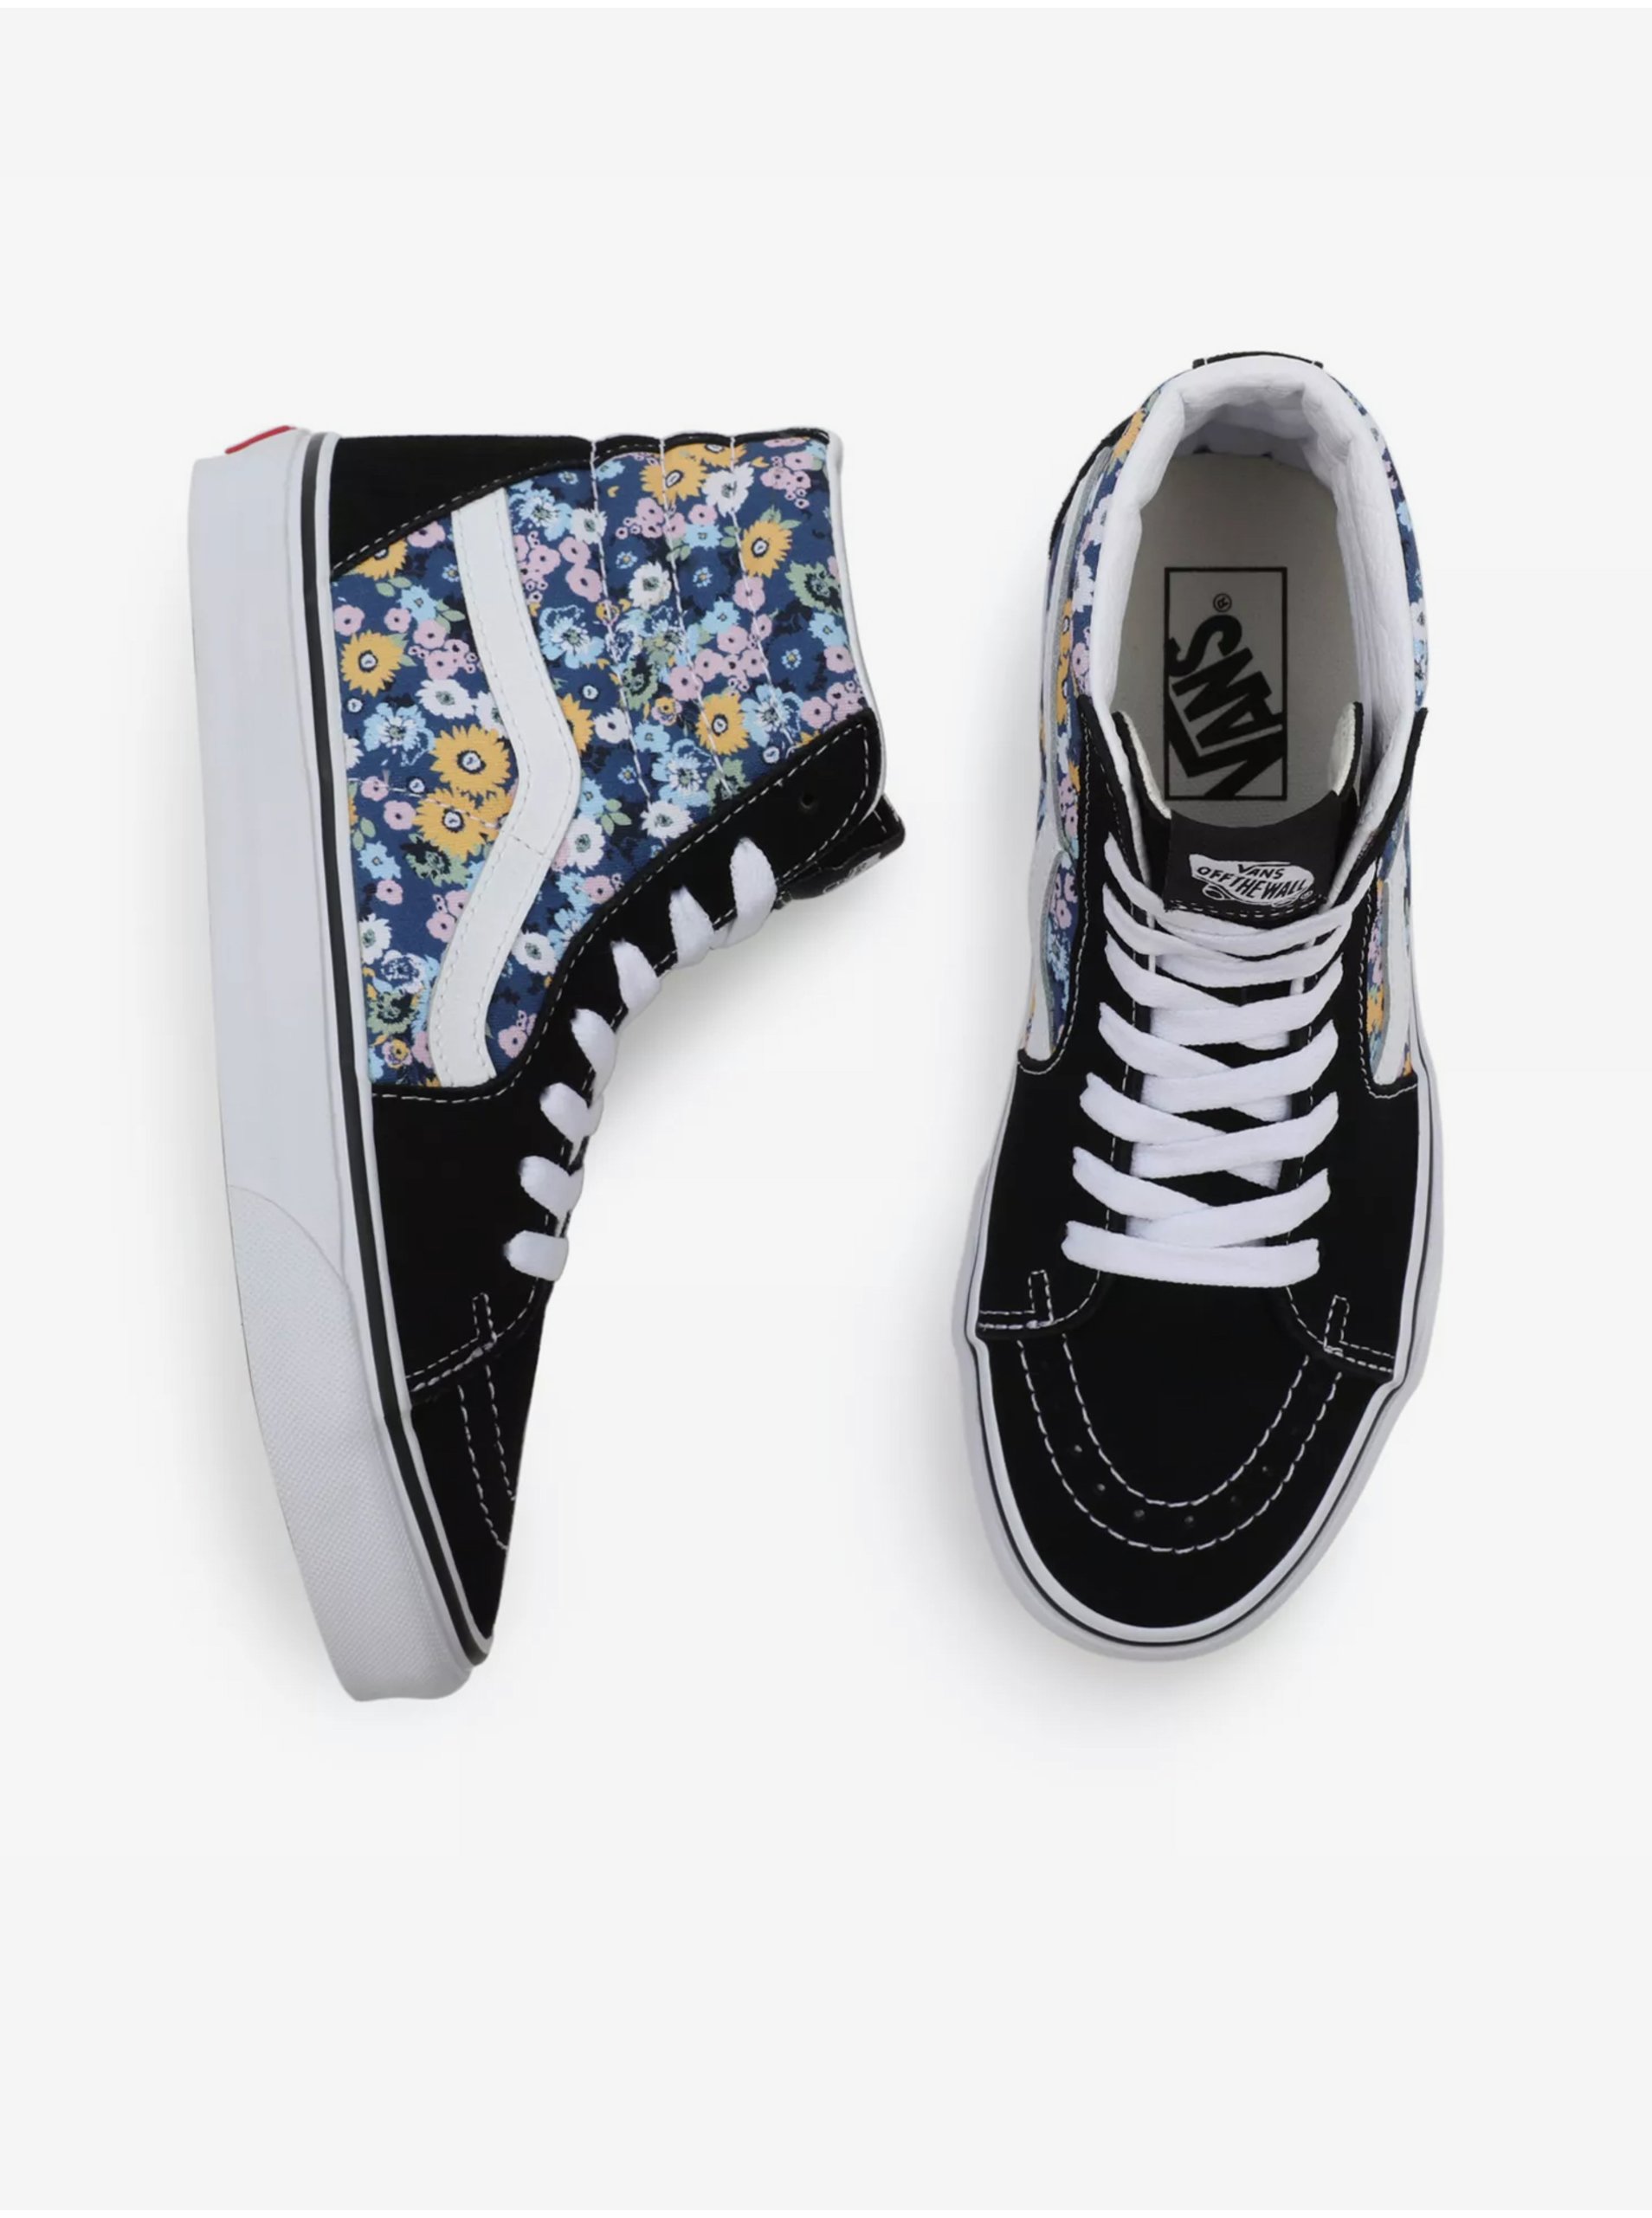 Vans Blue-Black Women Patterned Ankle Sneakers with Suede Details - Women